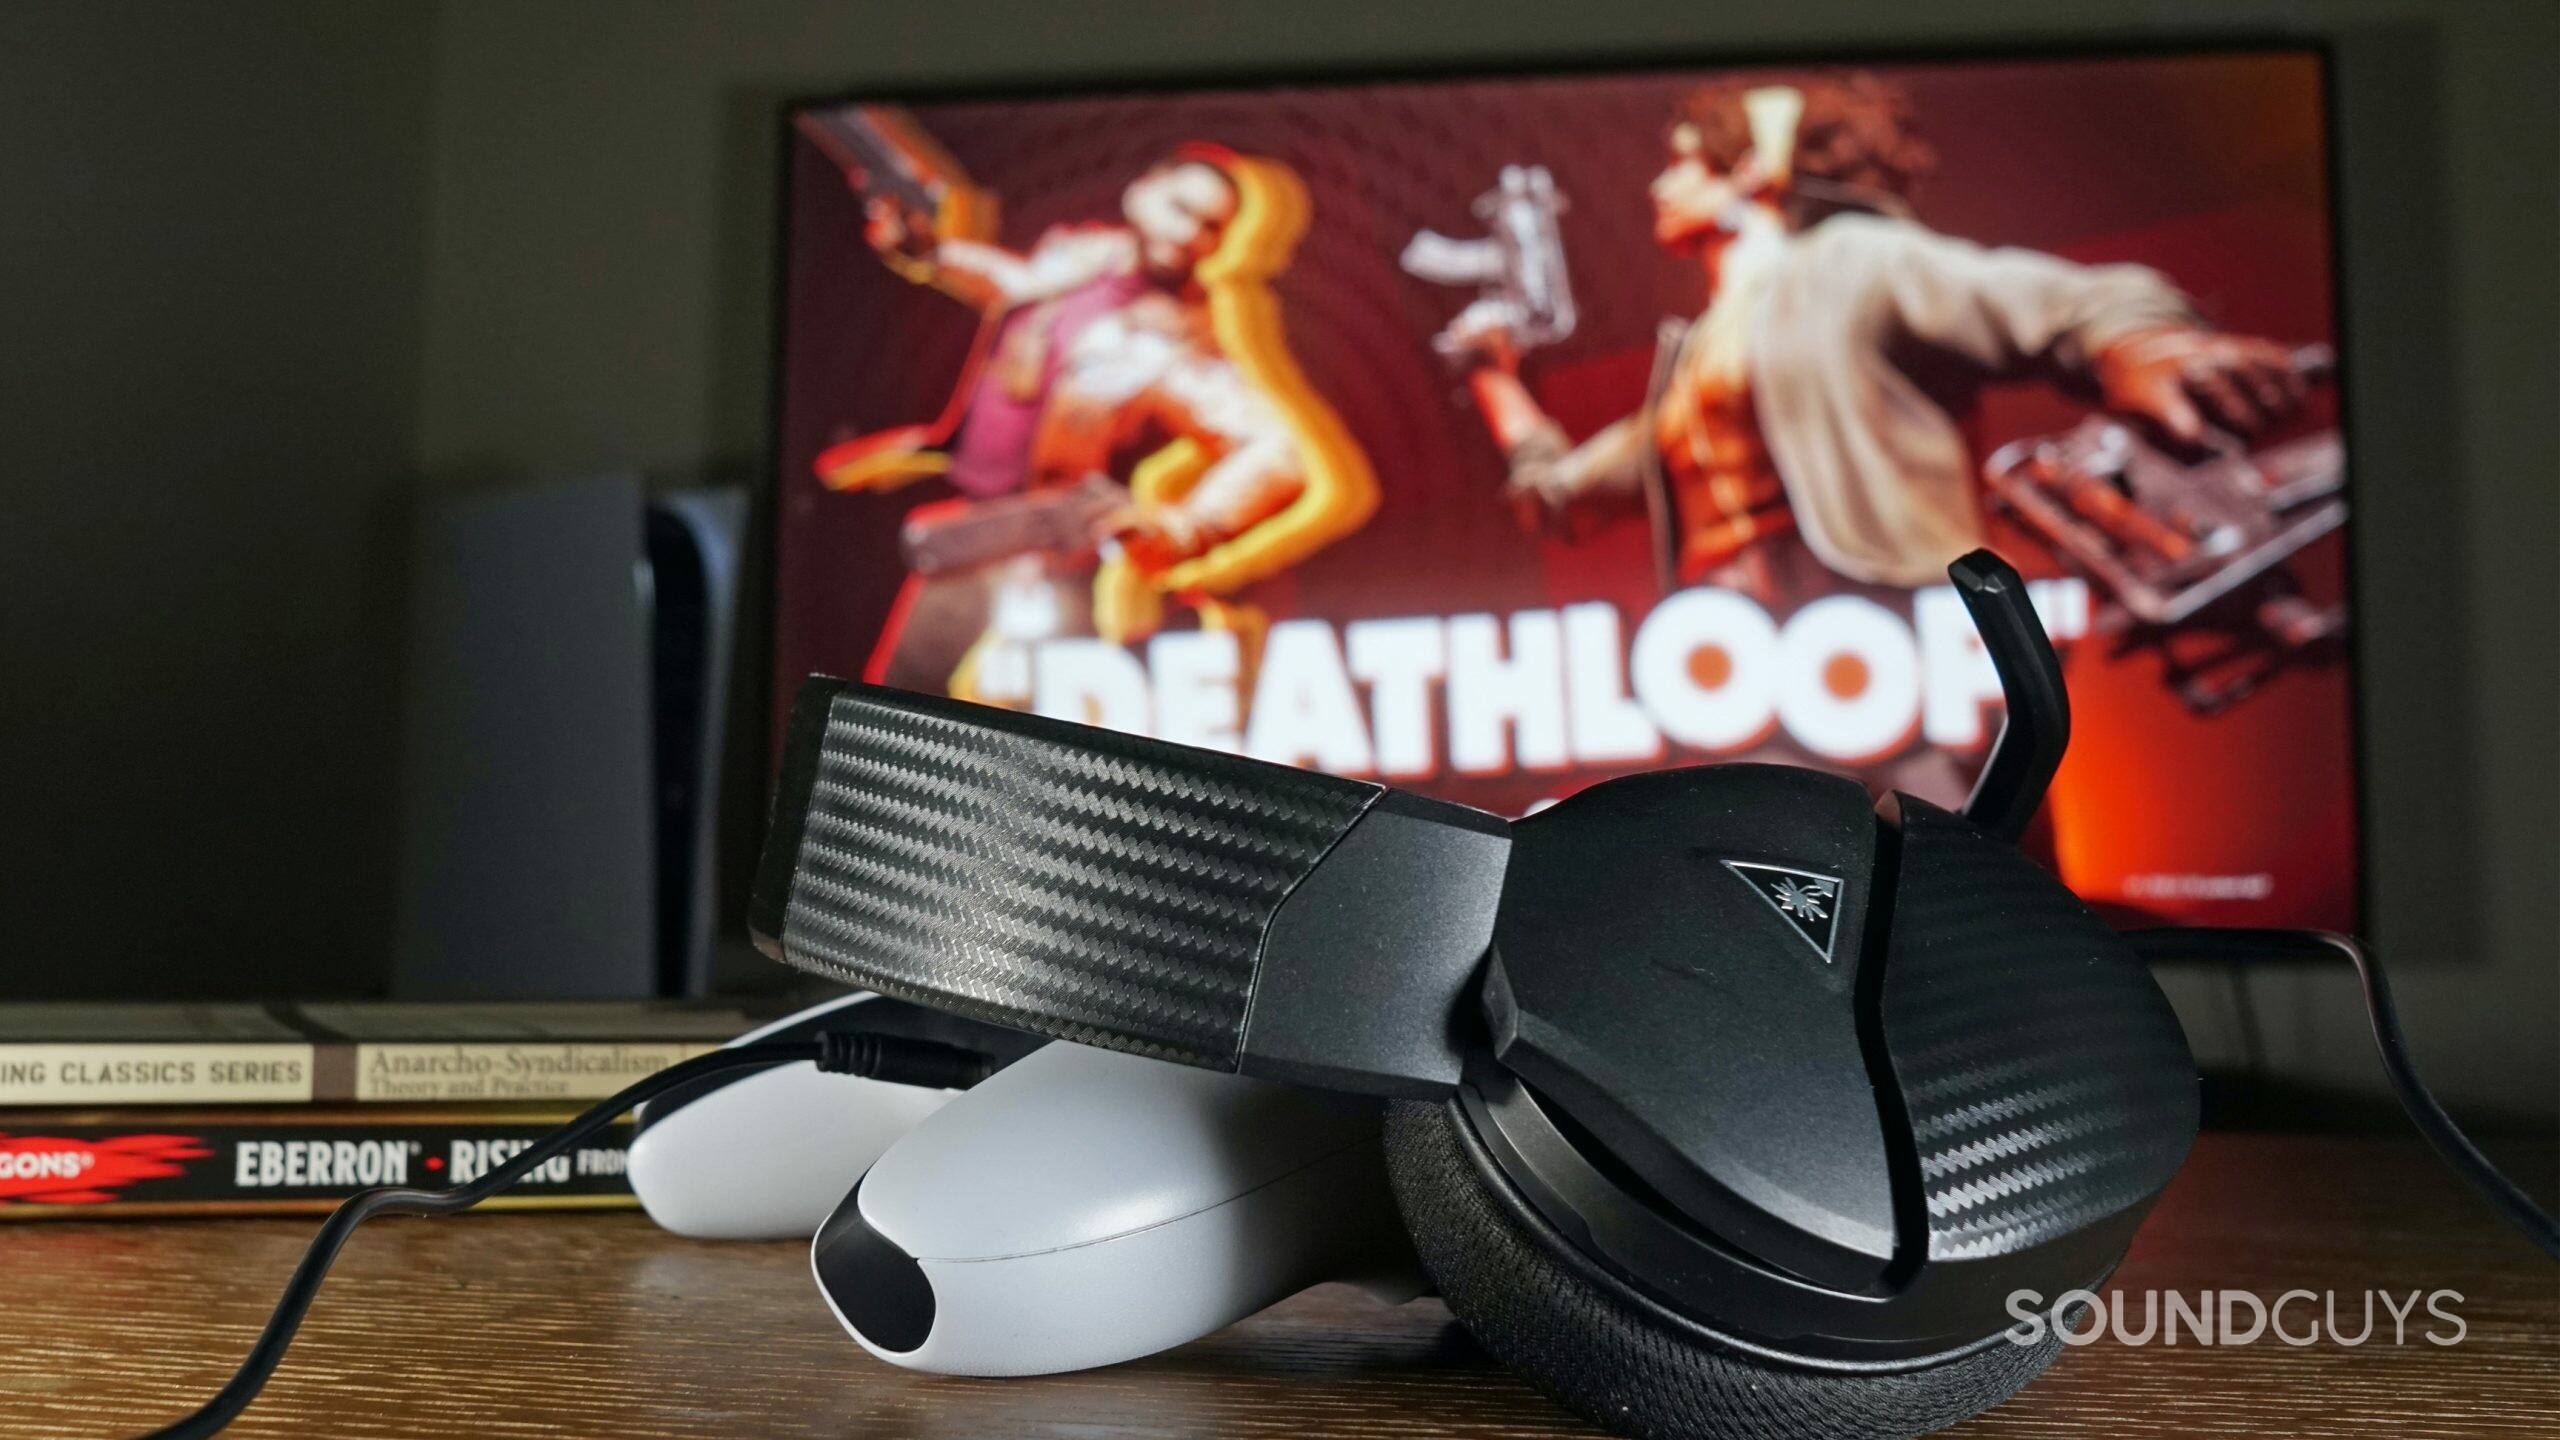 The Turtle beach Recon 200 Gen 2 gaming headset leans on a PlayStation DualSense controller in front of a TV showing Deathloop running on PlayStation 5.